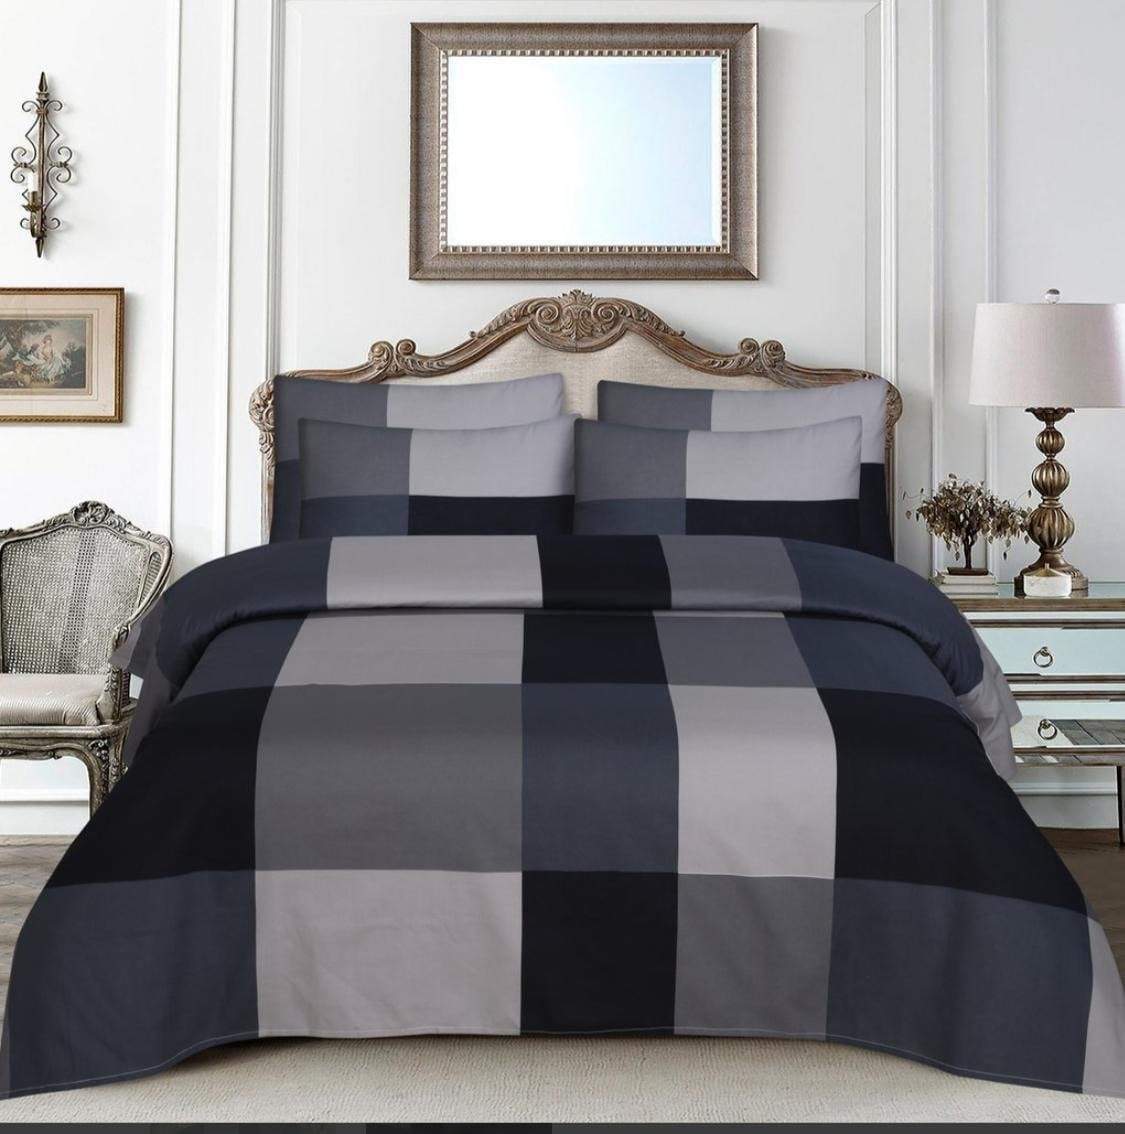 Grace D449-6 pc Comforter Set with 4 pillow covers